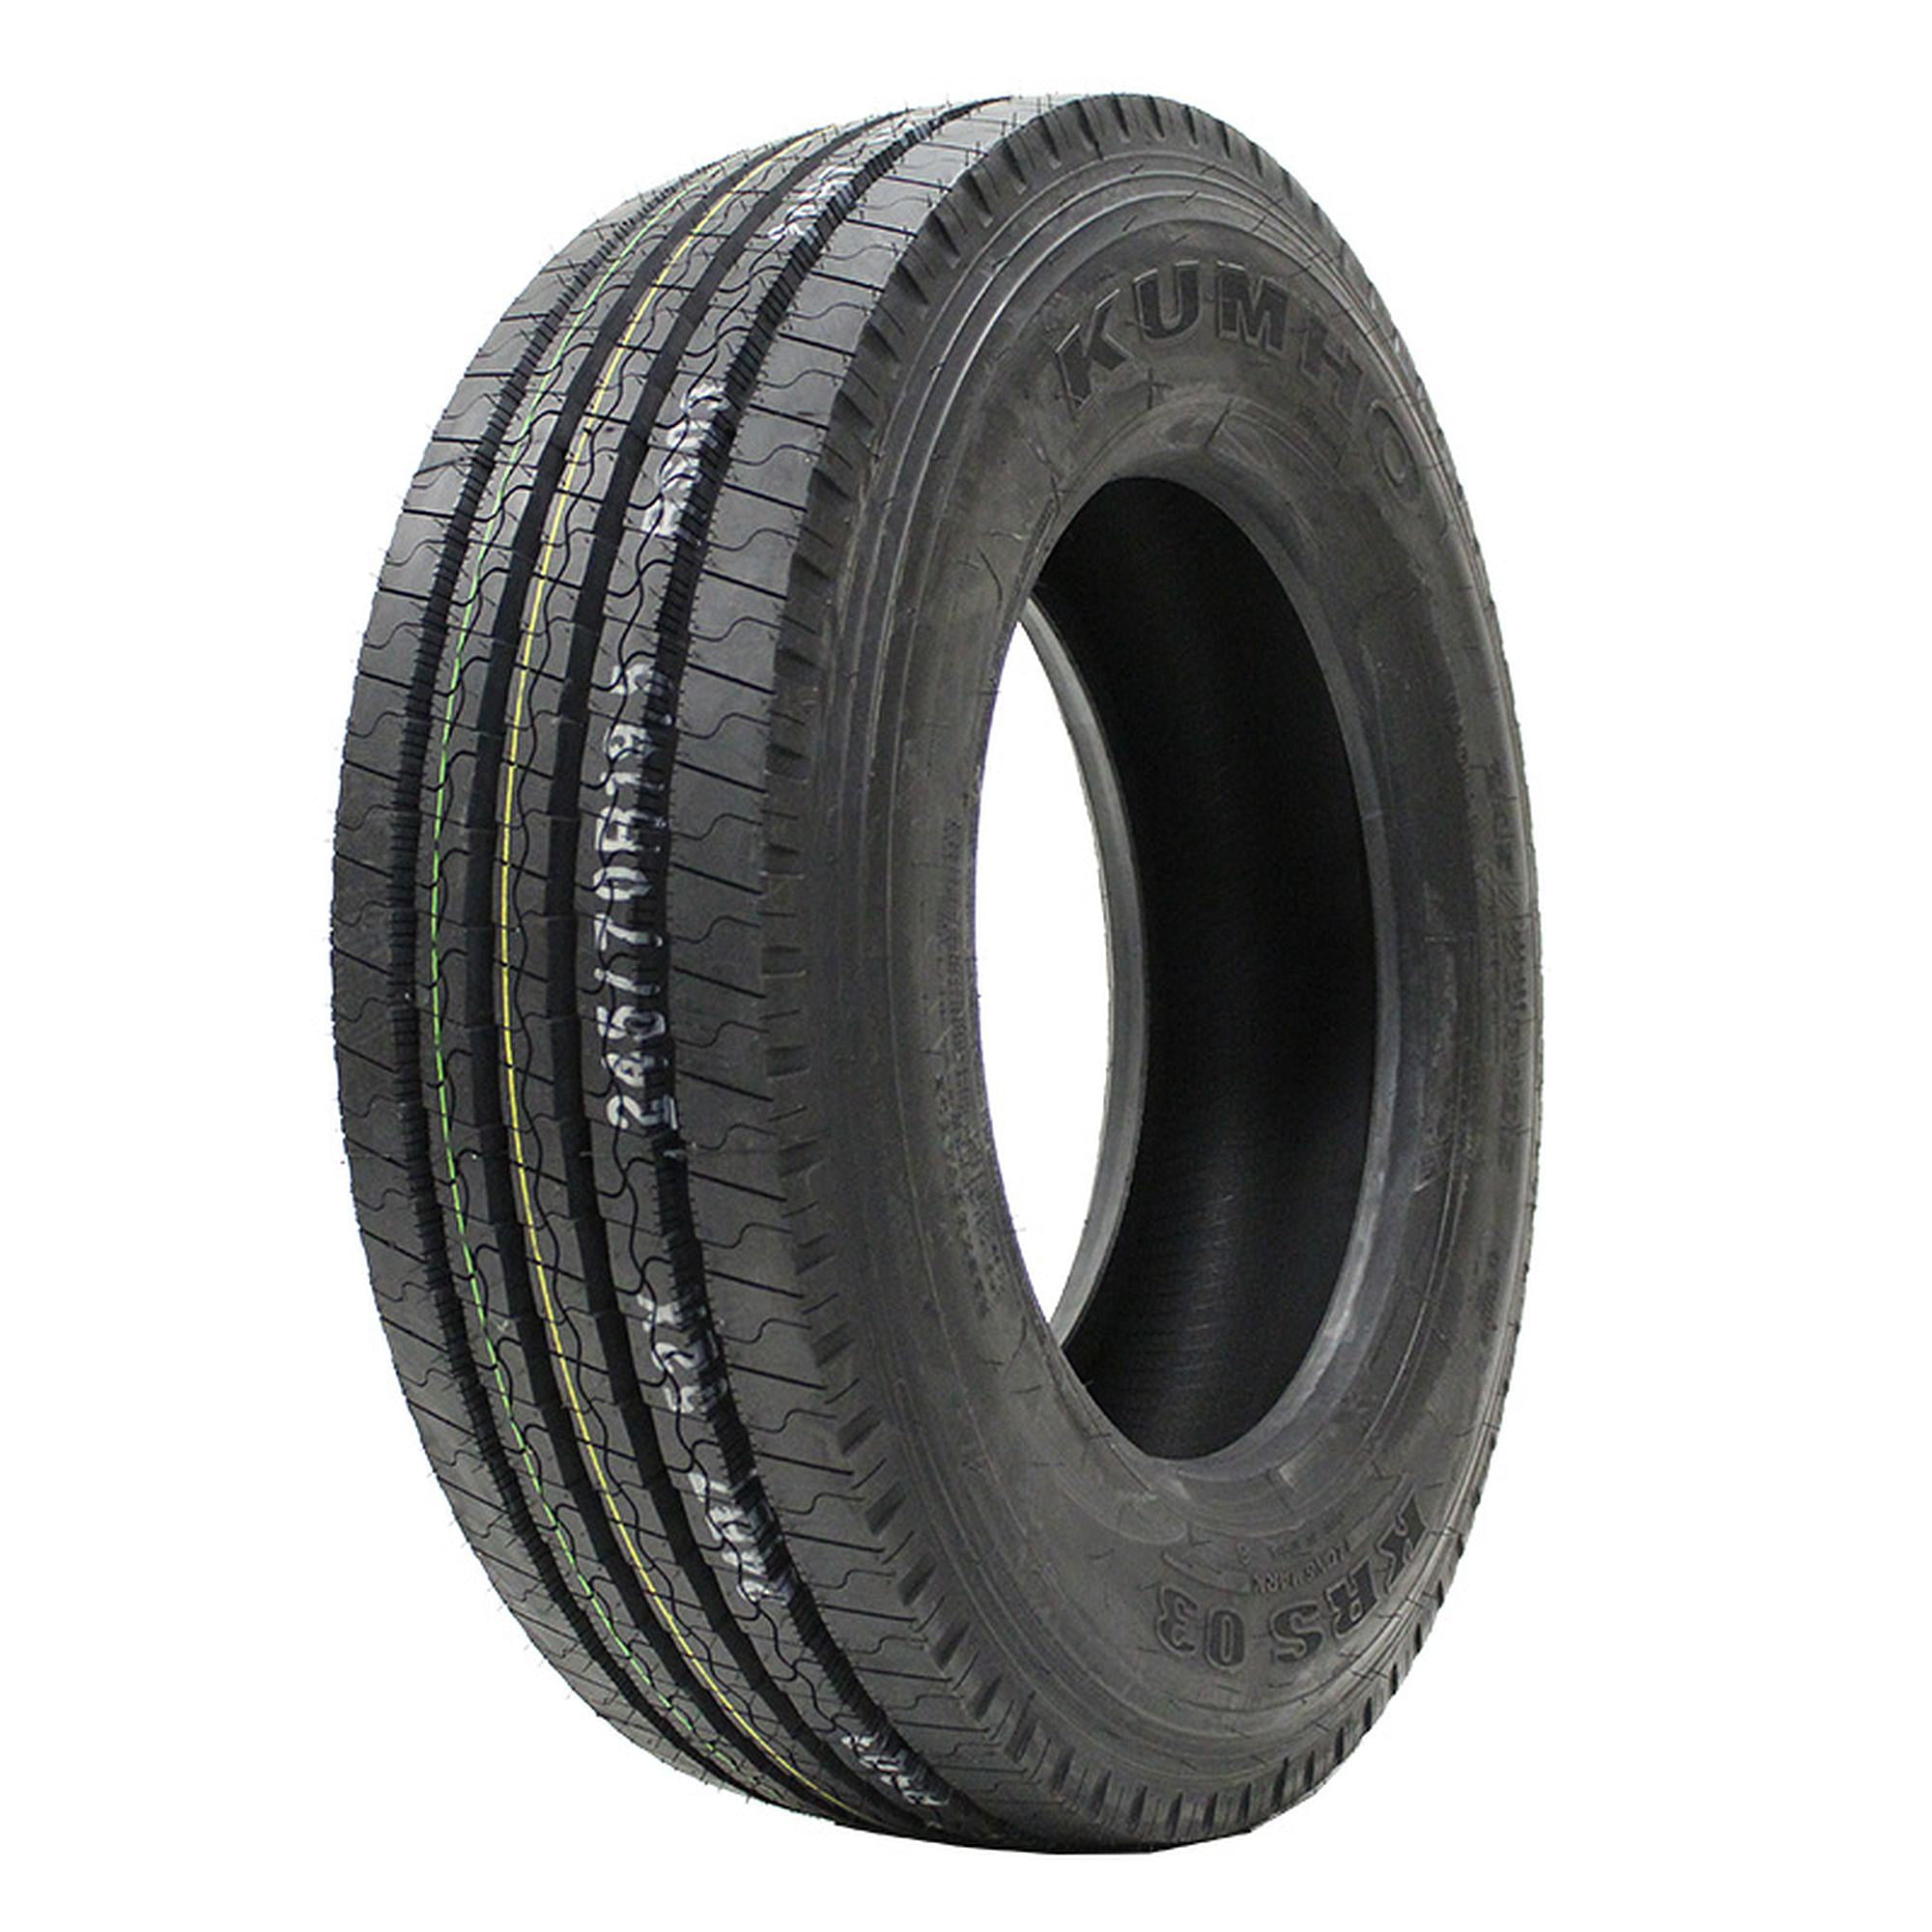 135 Commercial KRS03 Tire 245/70R19.5 Kumho